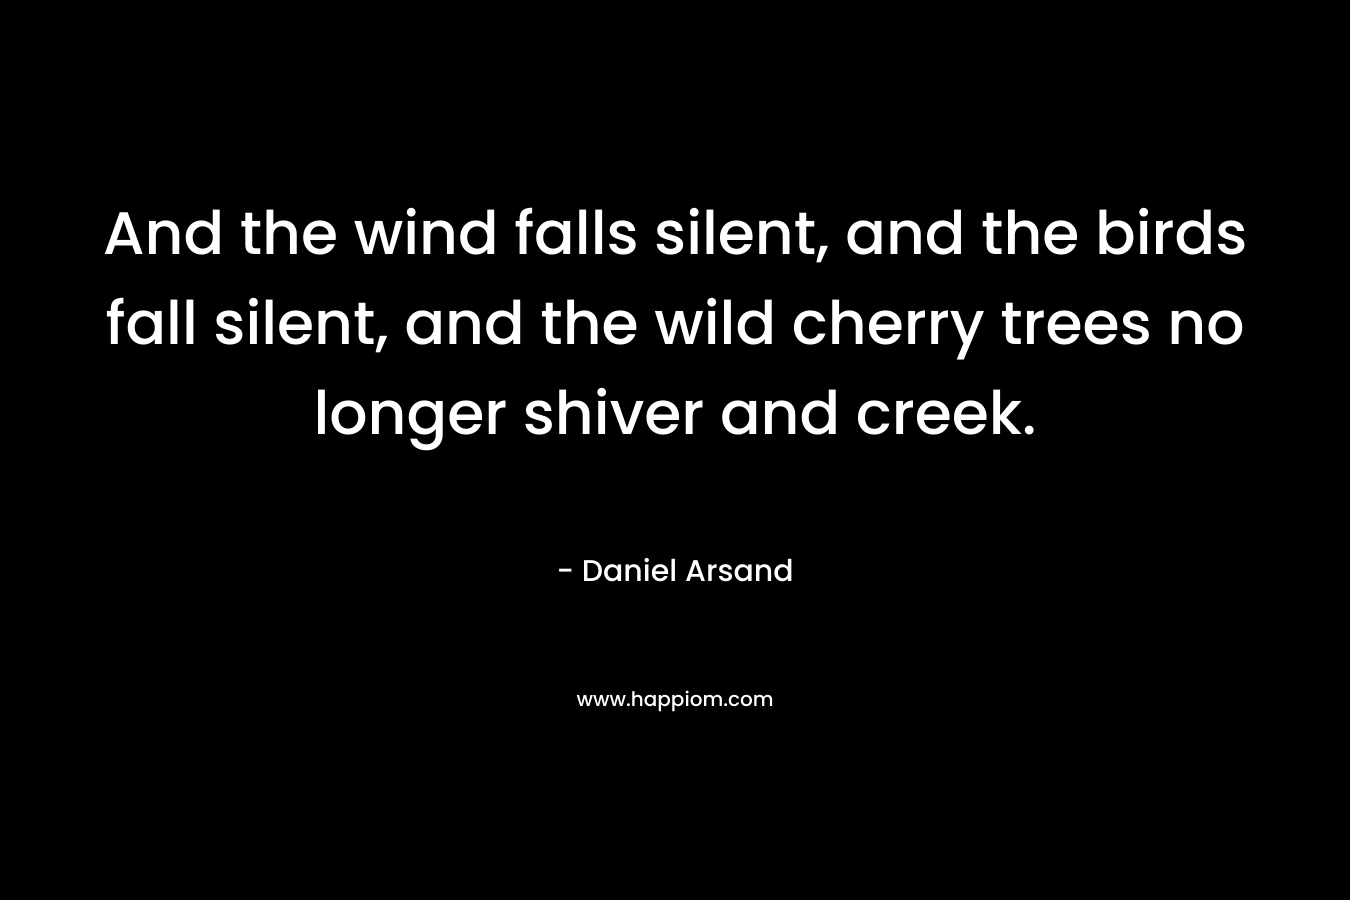 And the wind falls silent, and the birds fall silent, and the wild cherry trees no longer shiver and creek. – Daniel Arsand